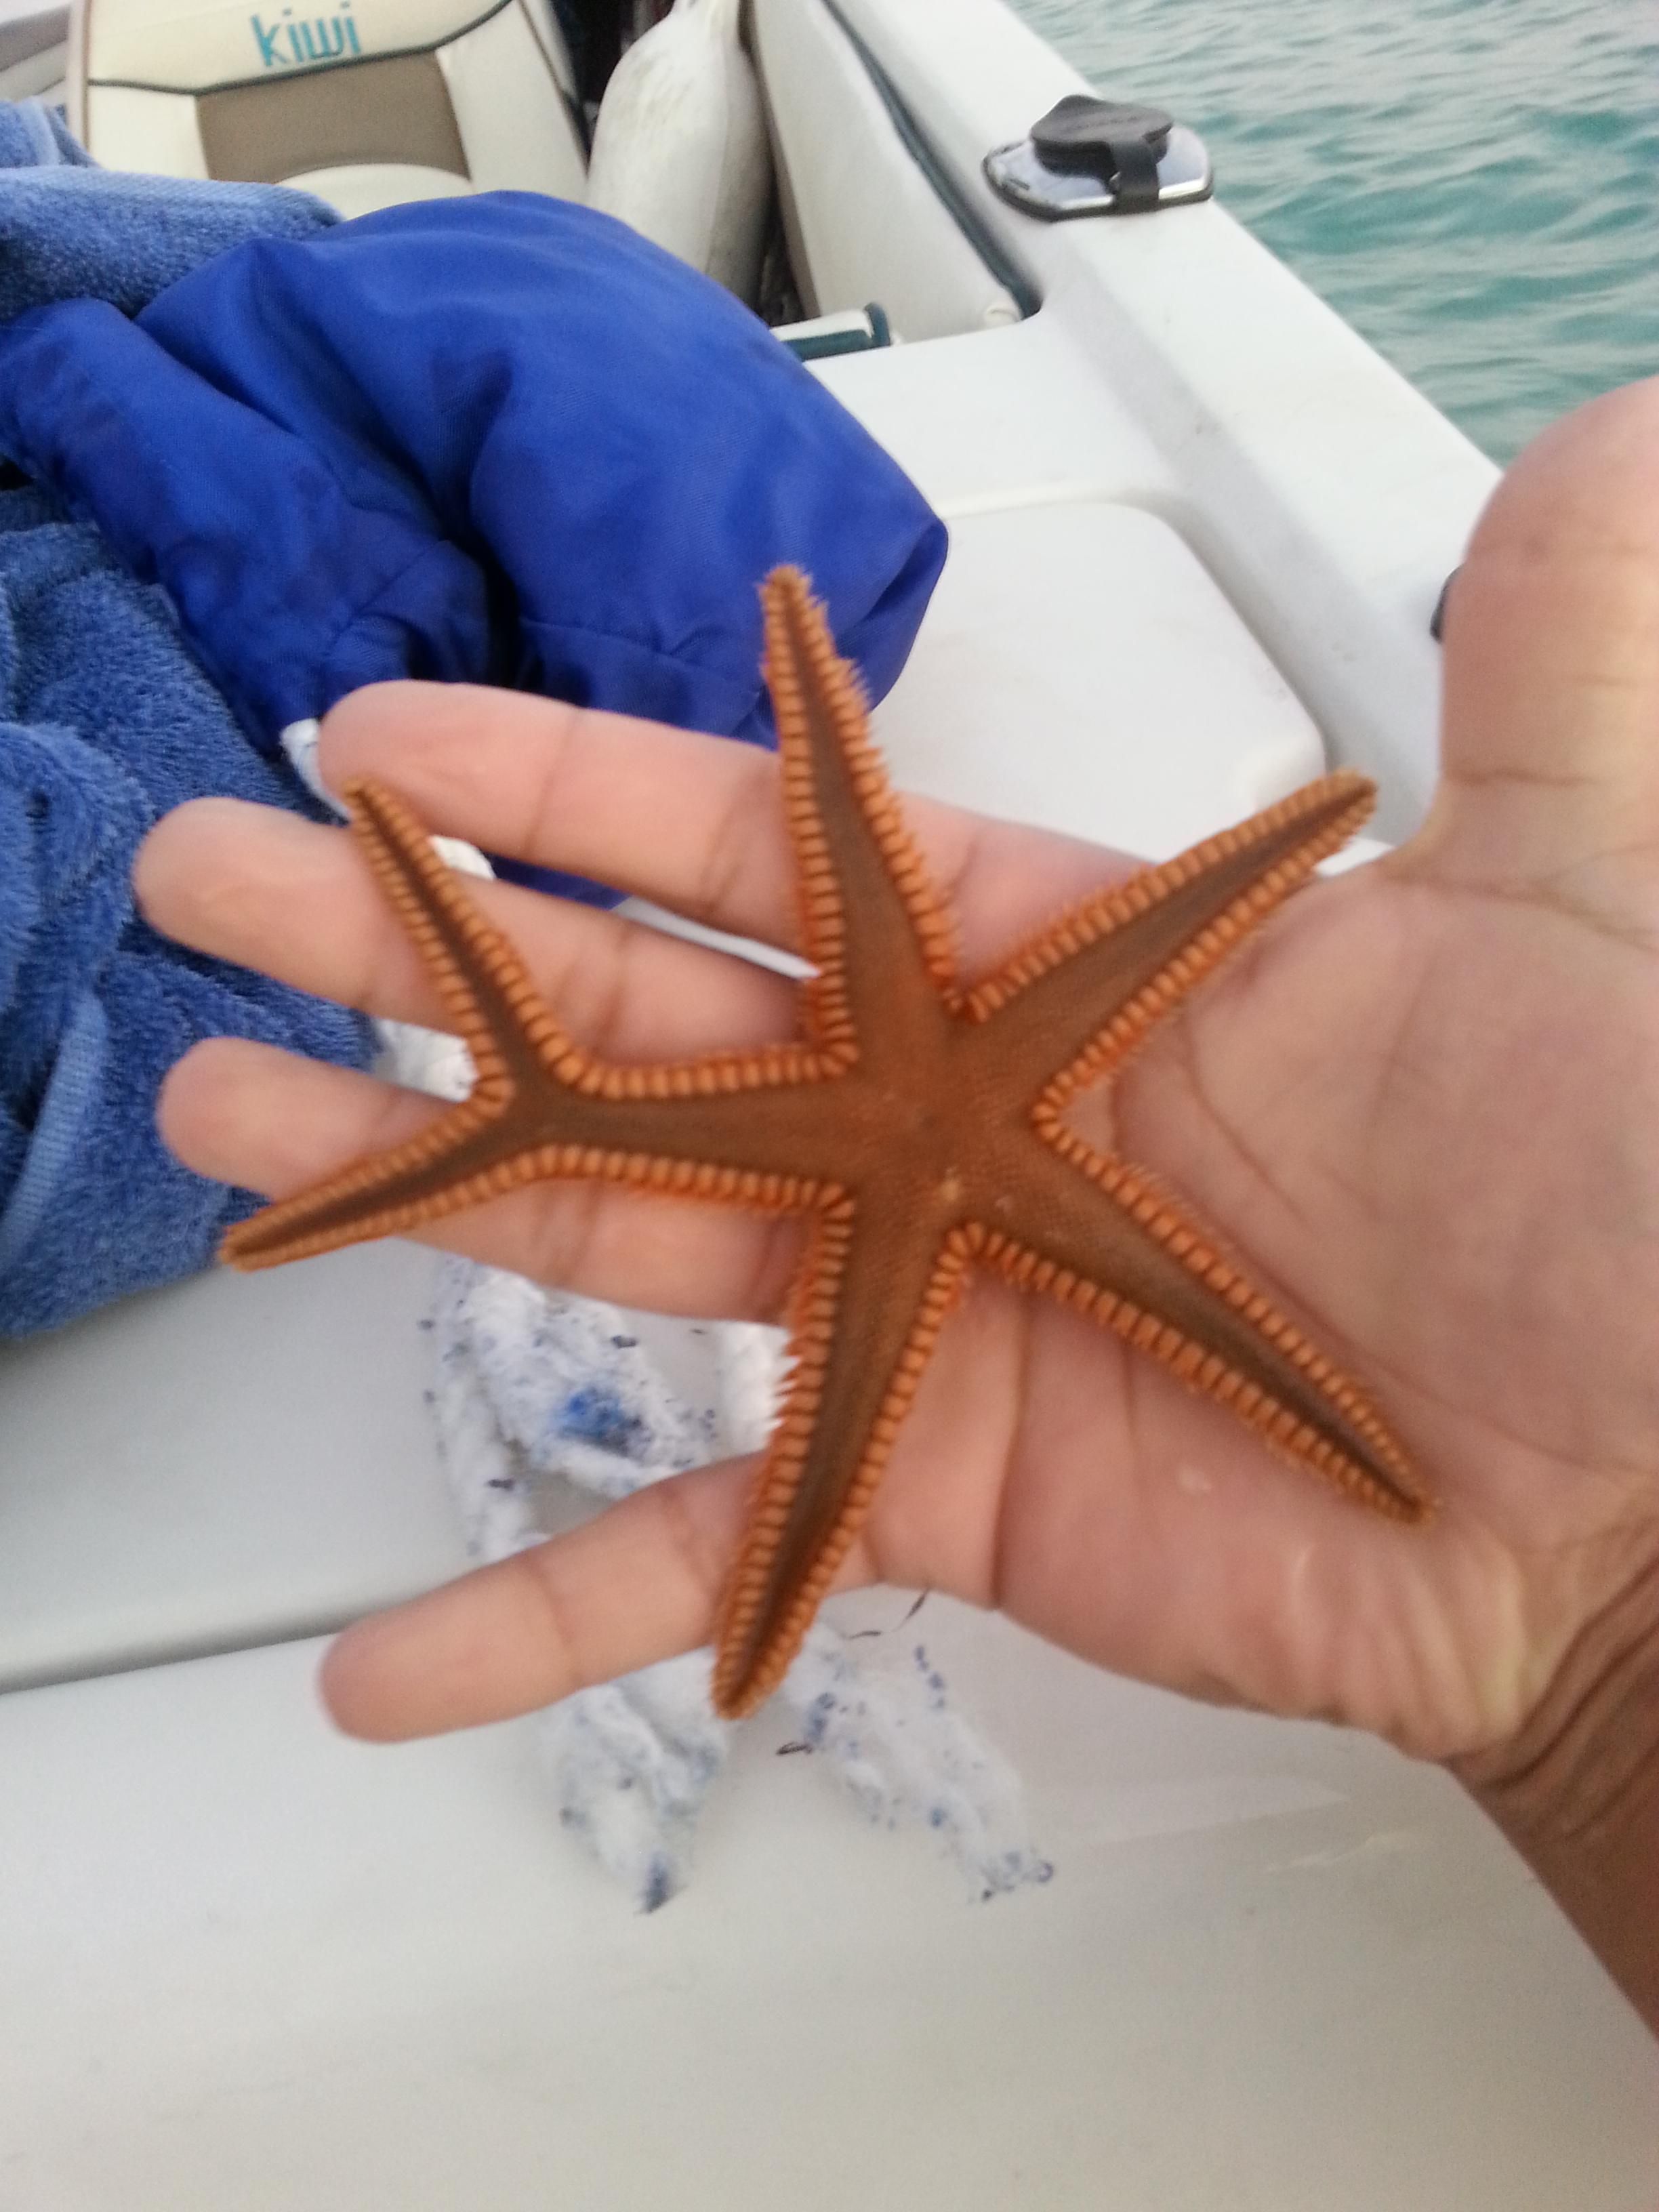 I just found a one in a million starfish! | Starfish, Animal and ...